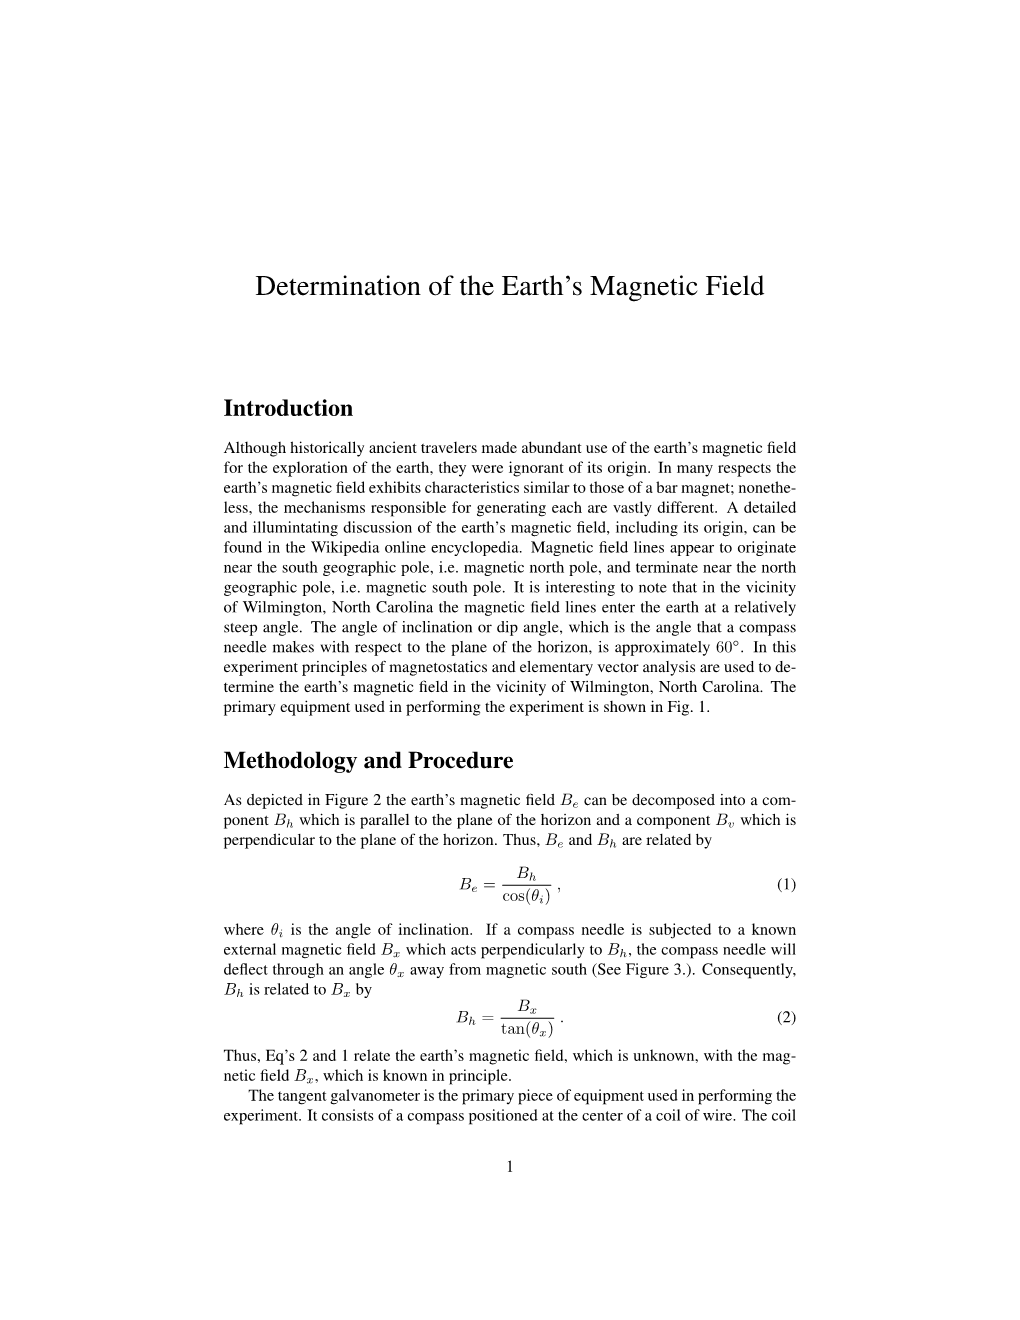 Determination of the Earth's Magnetic Field